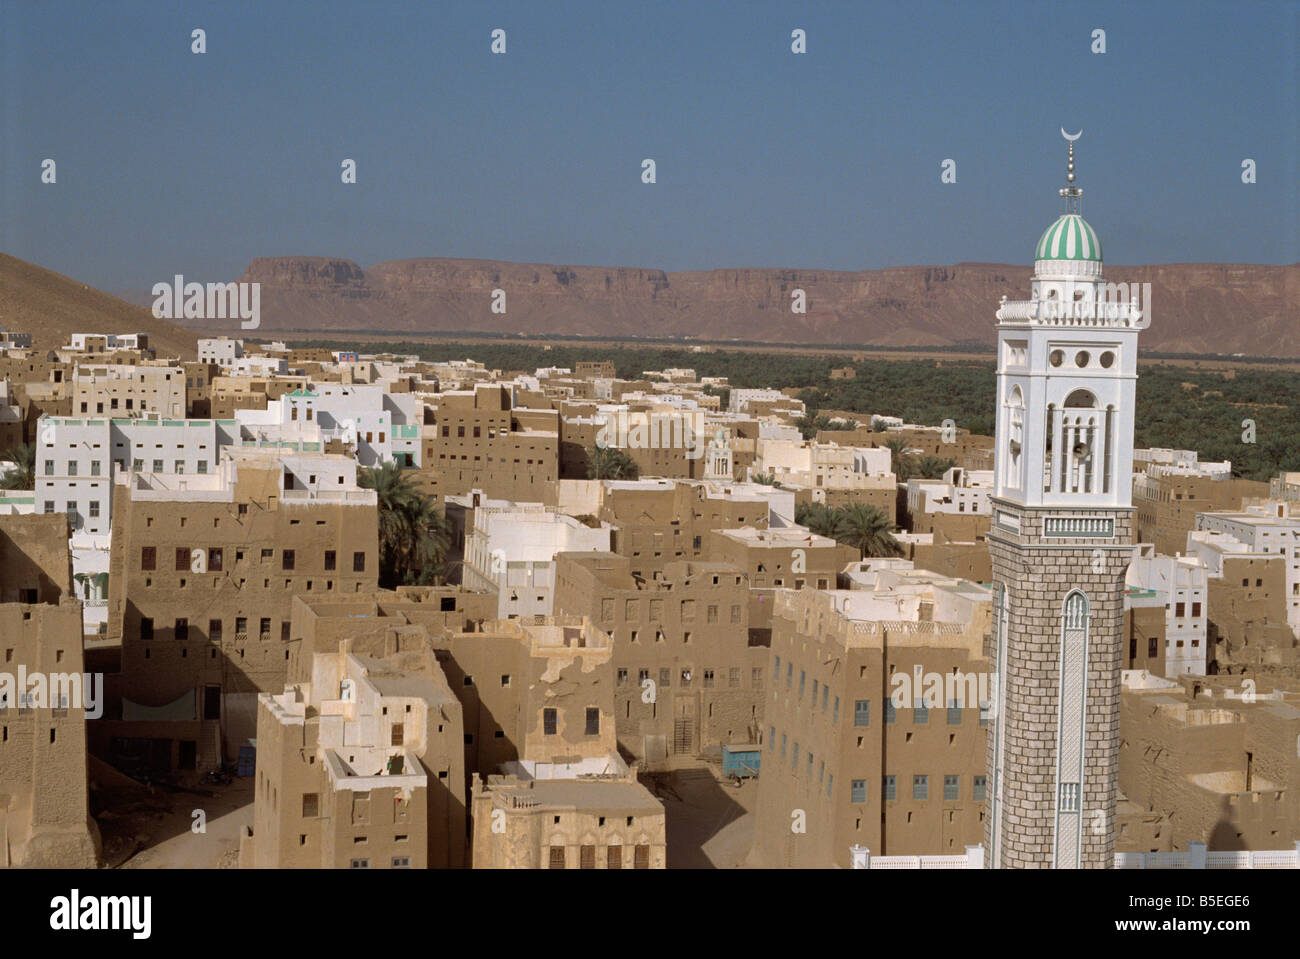 View from the roof of the Sultan's palace, Seiyun, Wadi Hadramaut, Yemen, Middle East Stock Photo